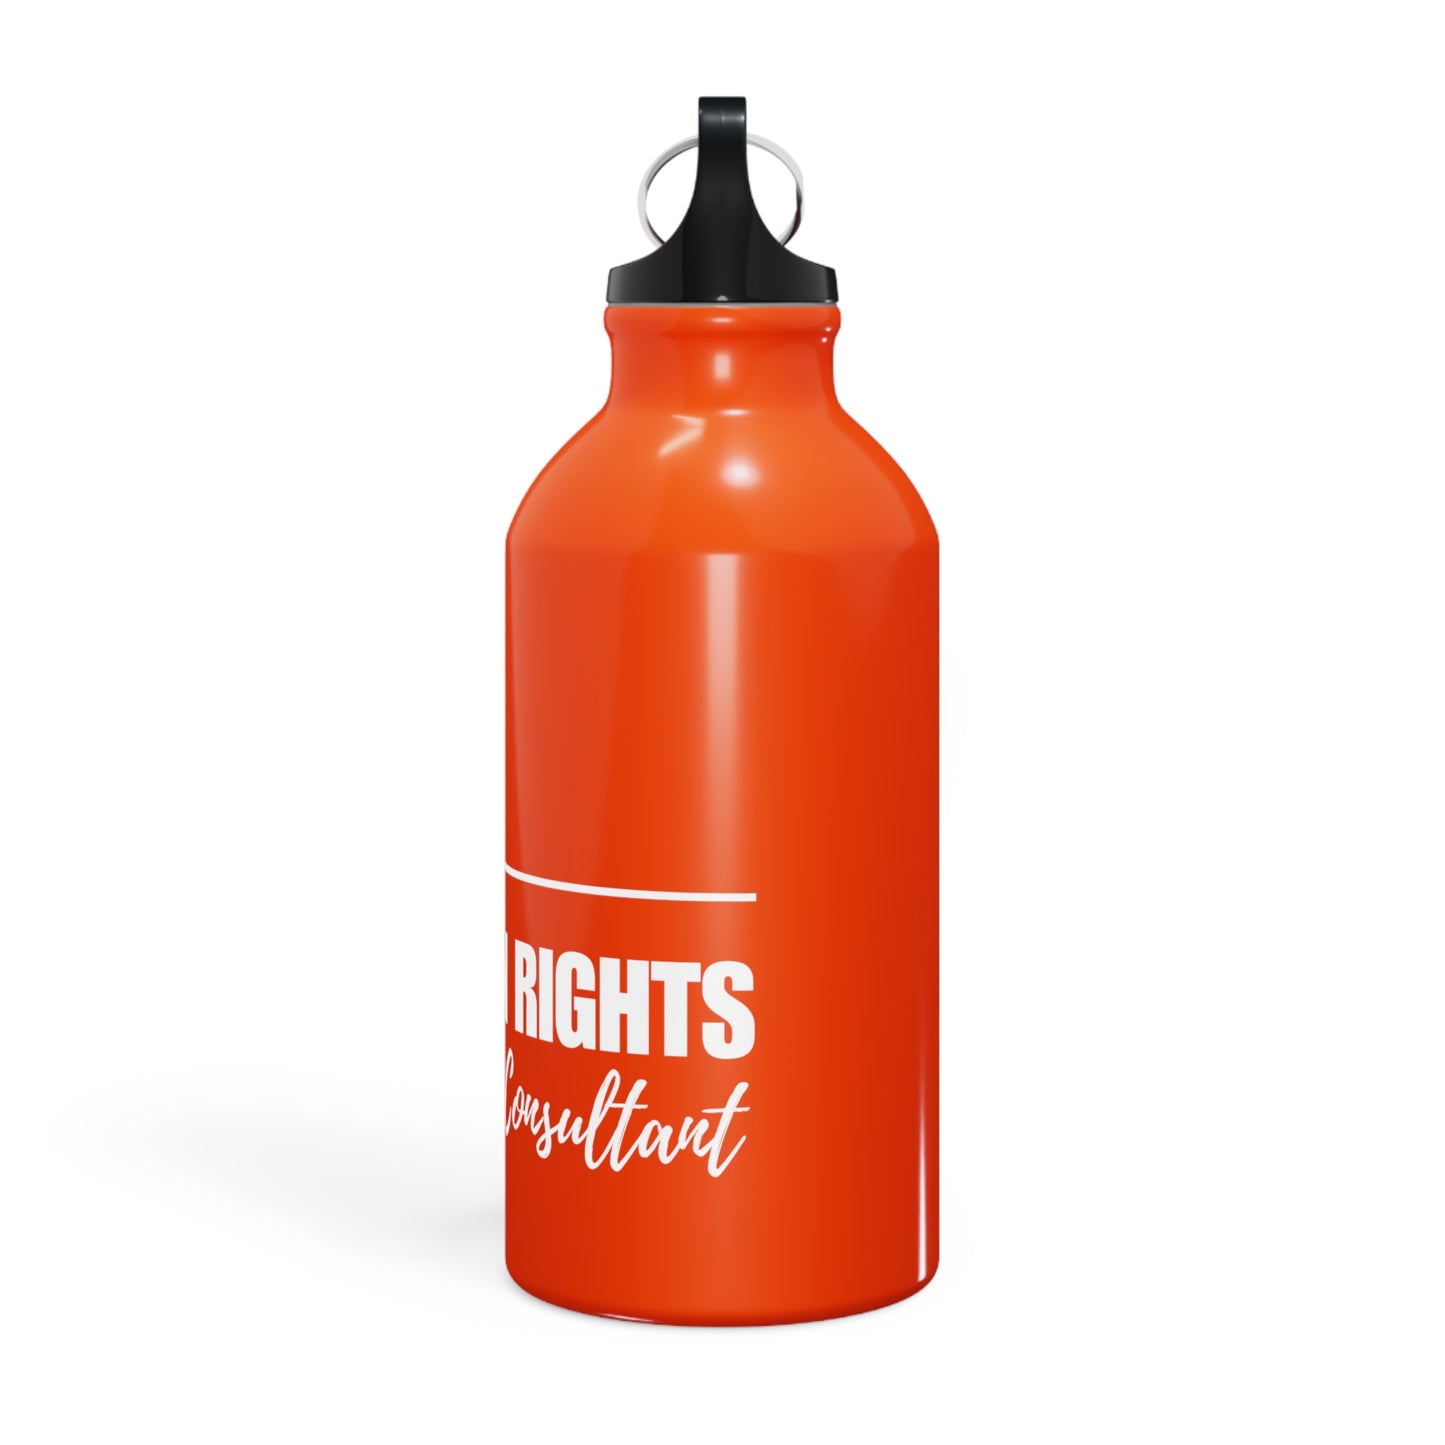 USIDHR Human Rights Consultant - Hydration Adventure Bottle